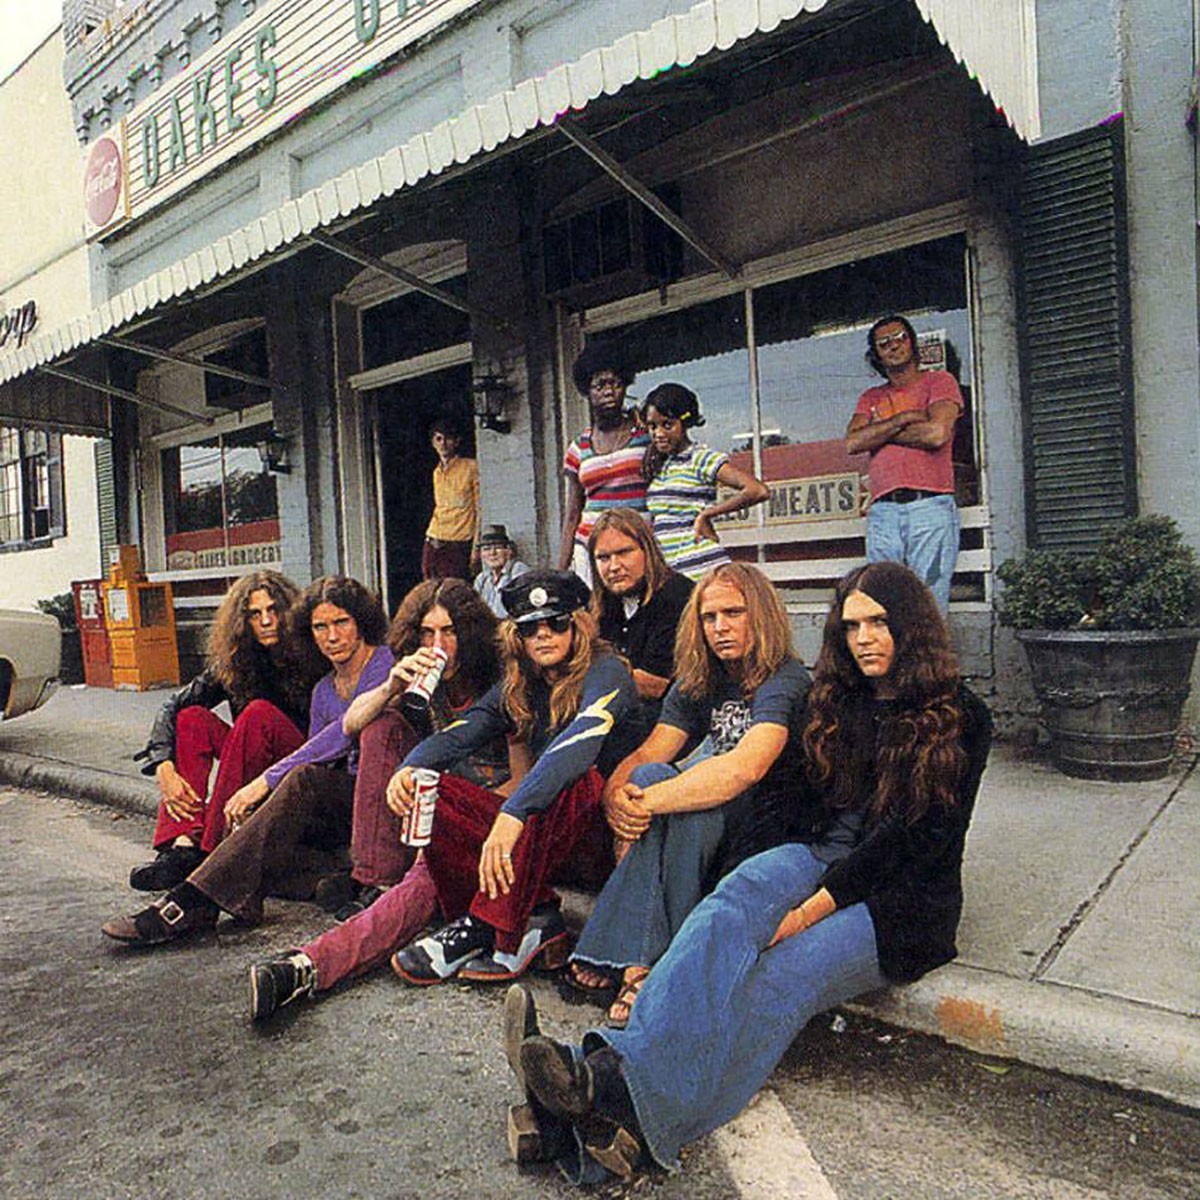 Lynyrd Skynyrd in 1973. Band members (seated from left): Allen Collins, Billy Powell, Bob Burns, Leon Wilkson, Ed King (seated at back), Ronnie Van Zant and Gary Rossington.